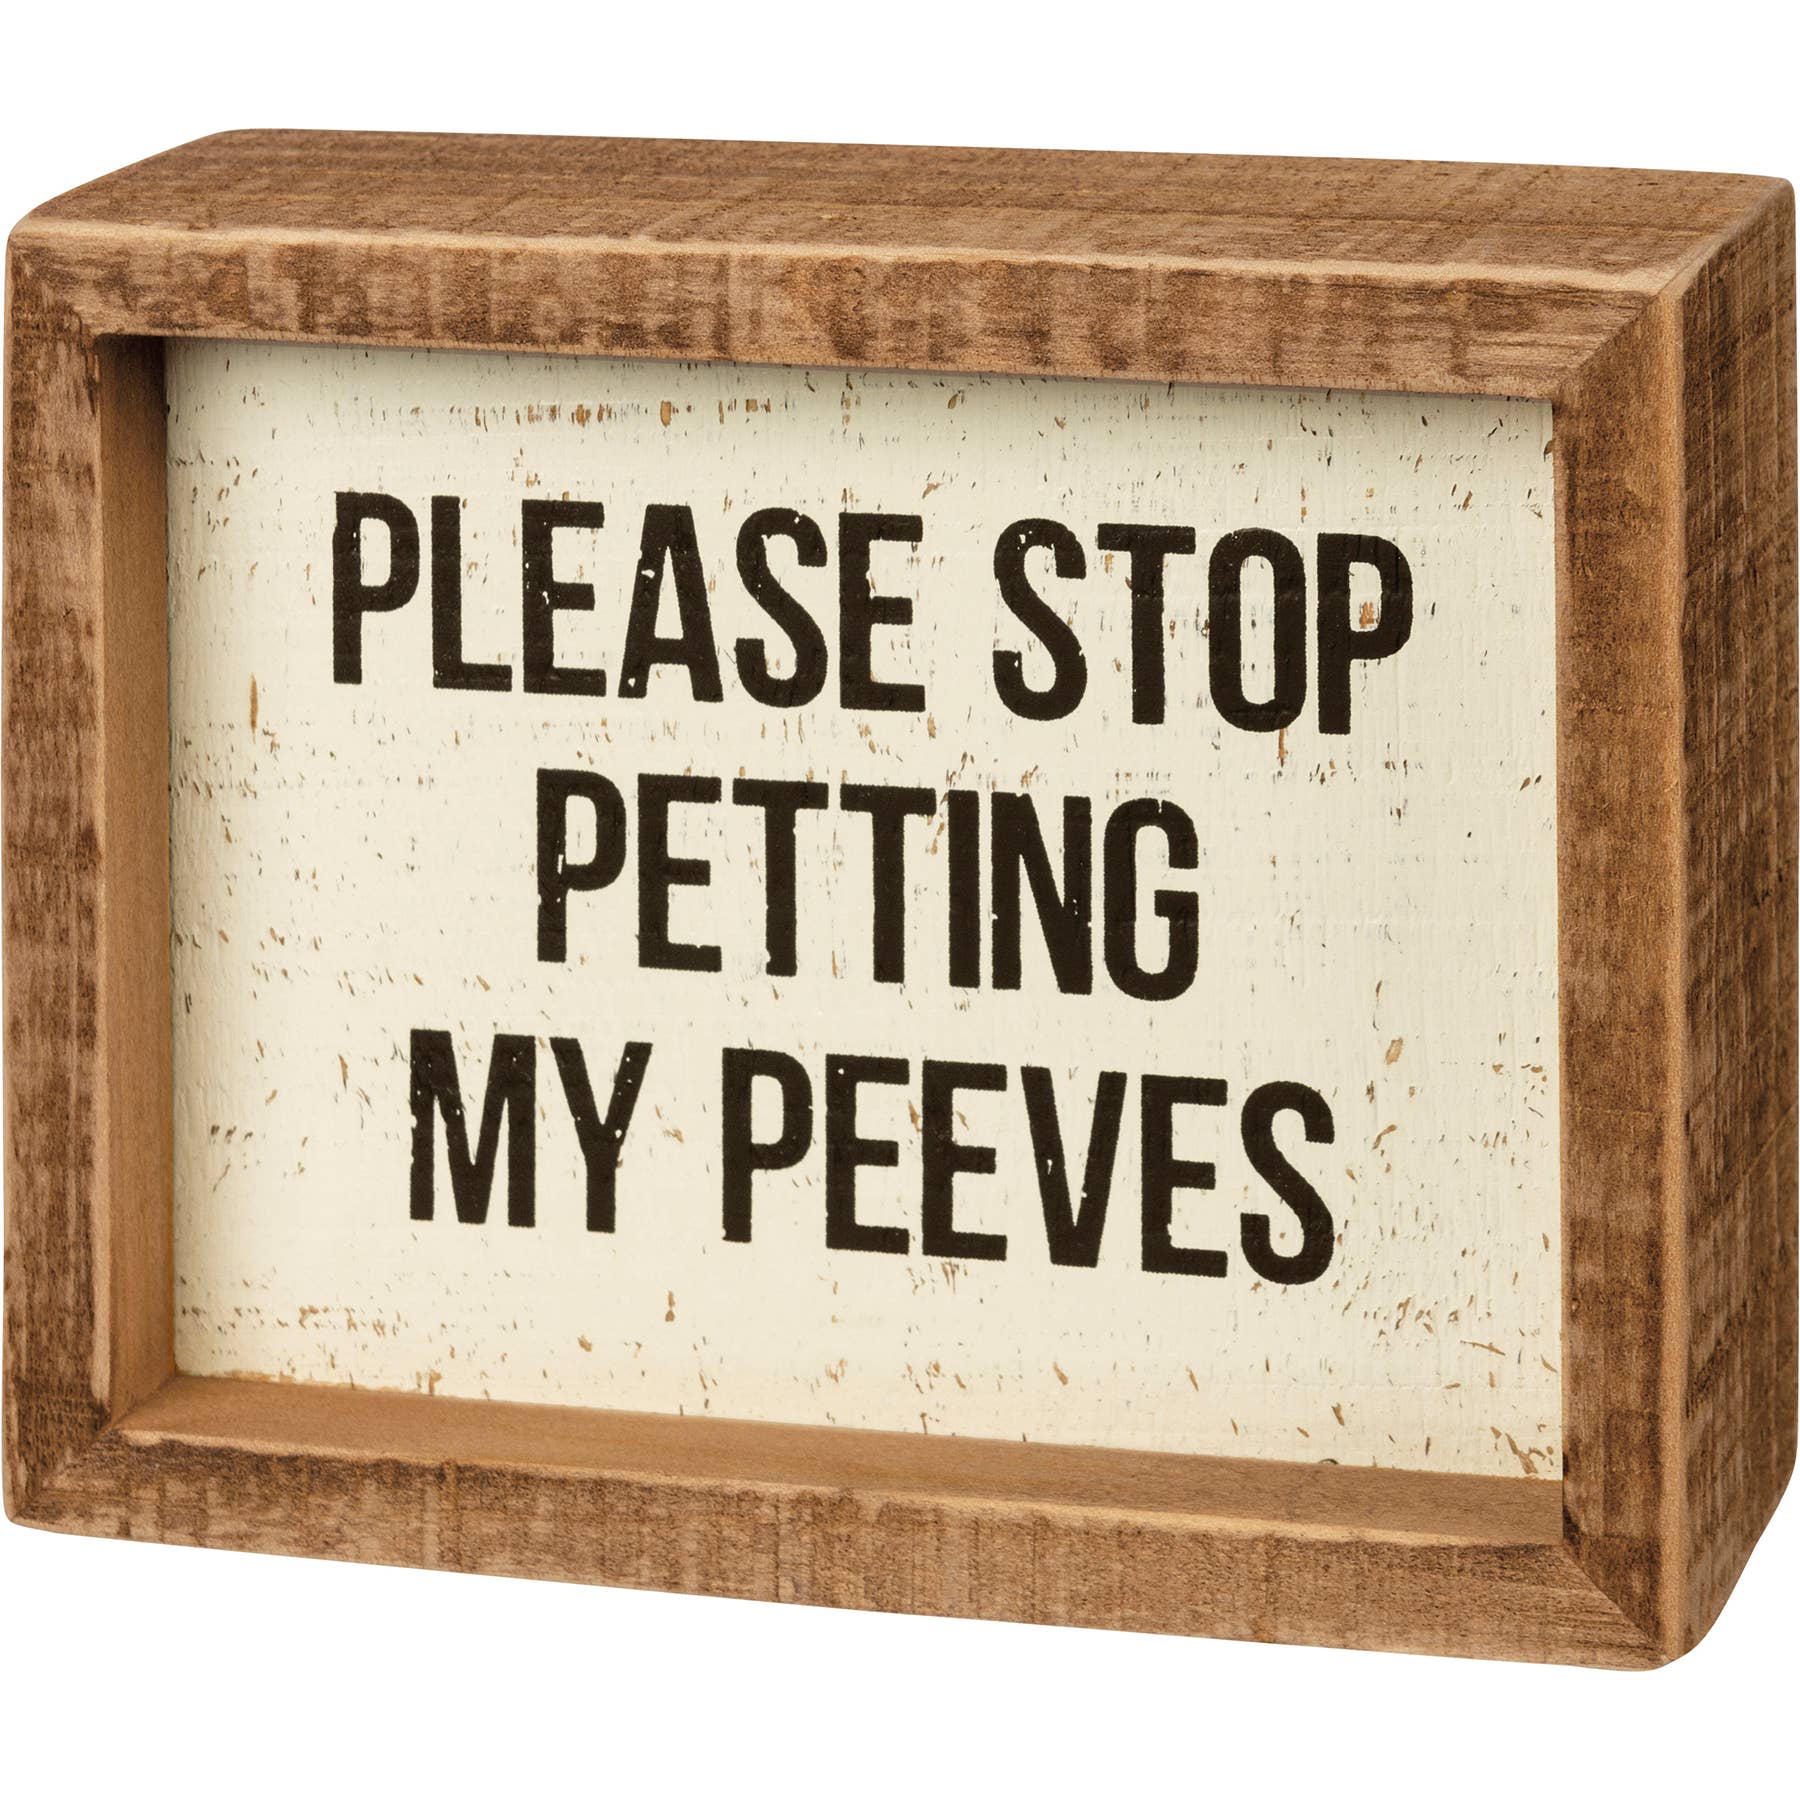 Primitives by Kathy - Please Stop Petting My Peeves Inset Box Sign